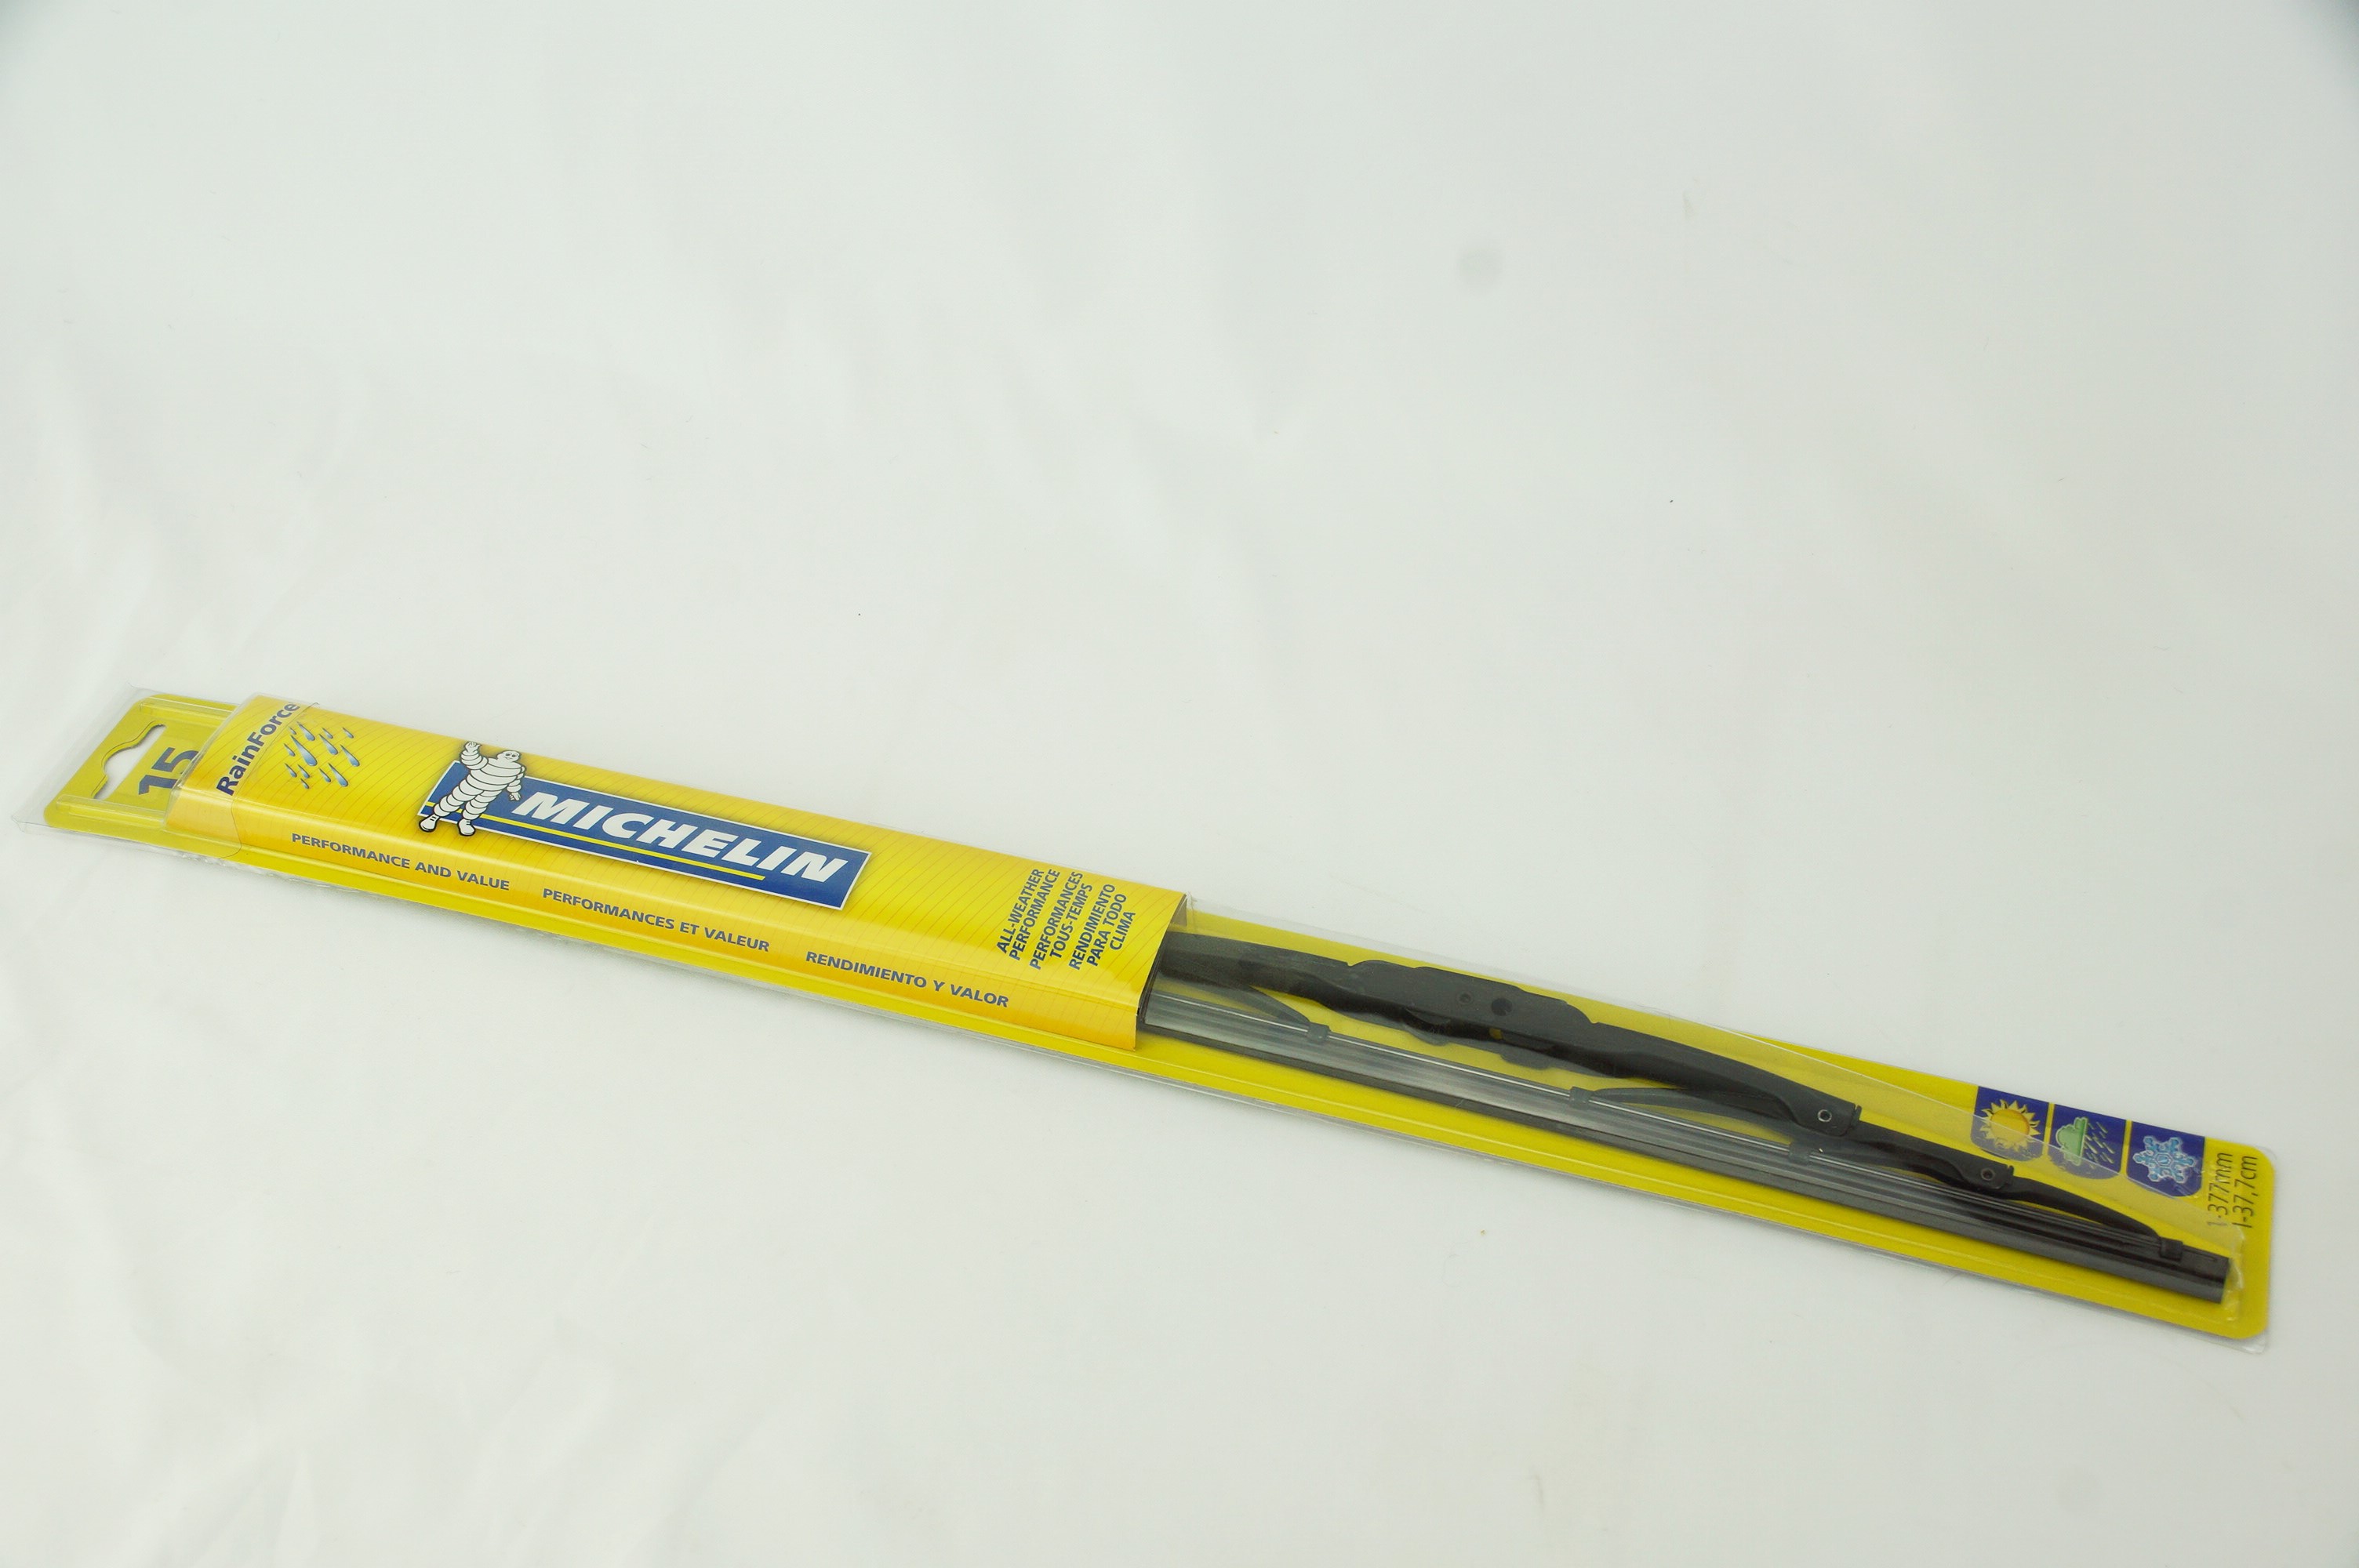 Michelin 3715 RainForce All Weather Performance Series Wiper Blade 15 inch 380mm - image 2